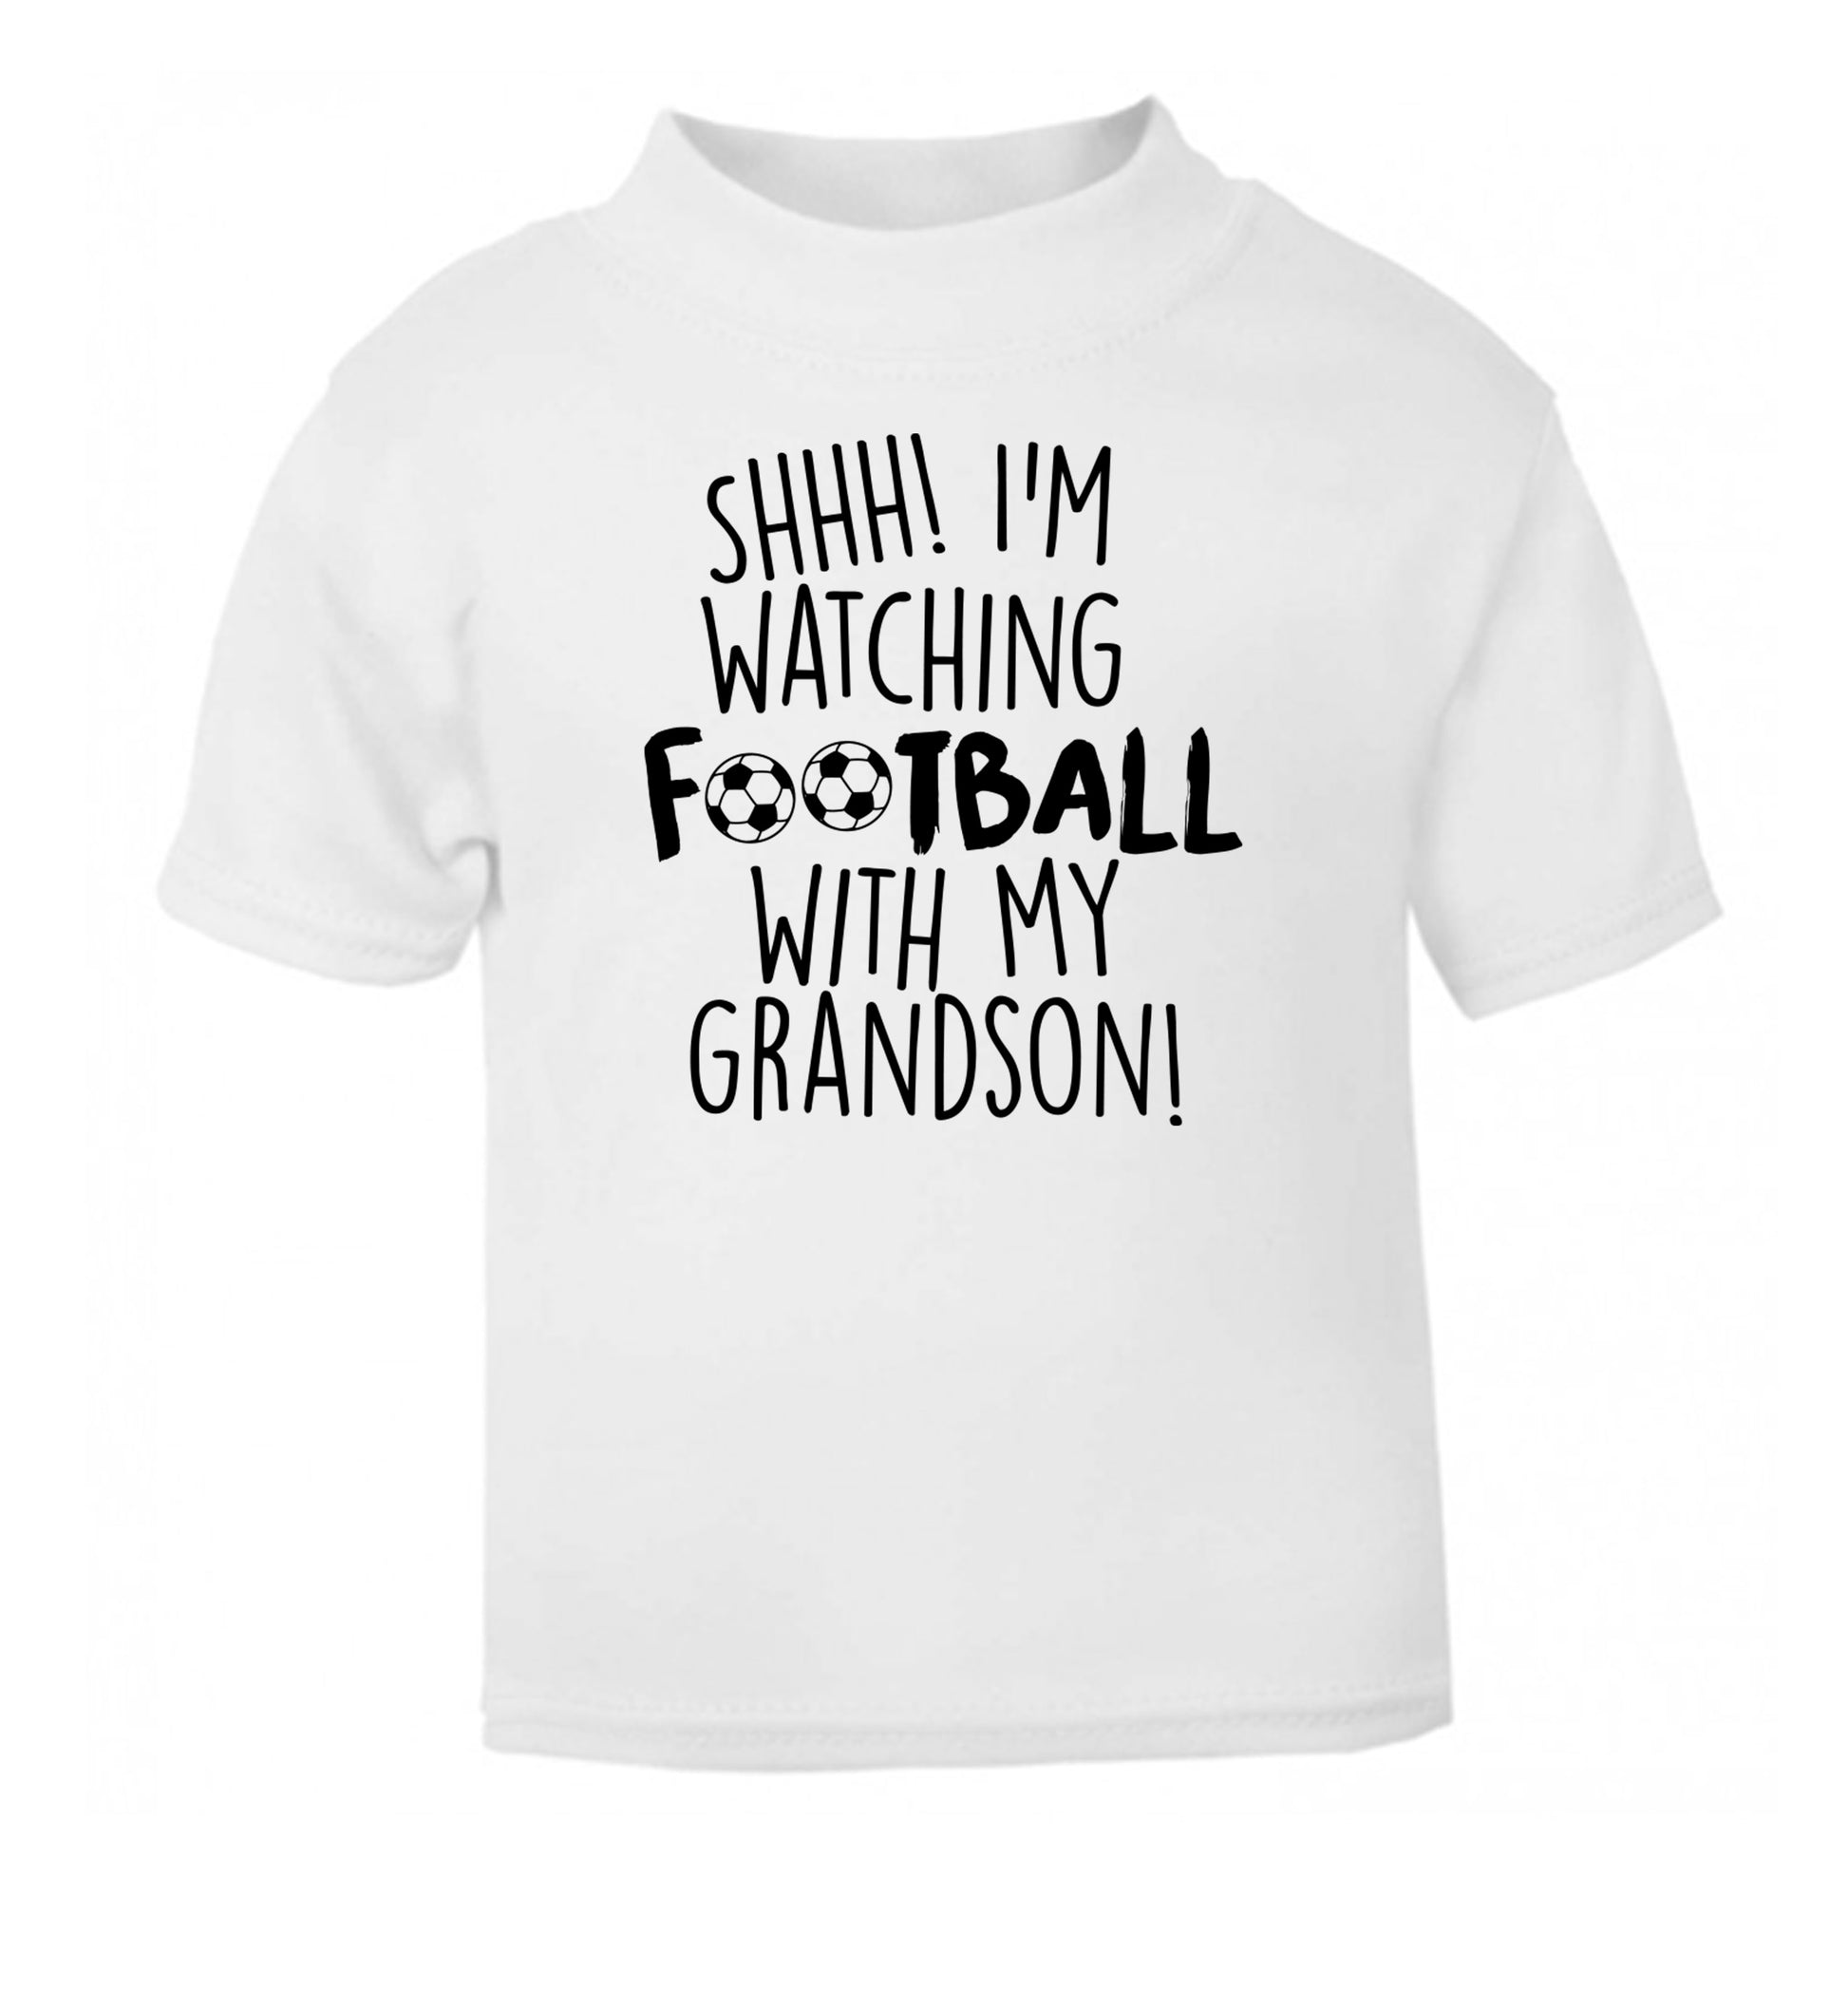 Shhh I'm watching football with my grandson white Baby Toddler Tshirt 2 Years